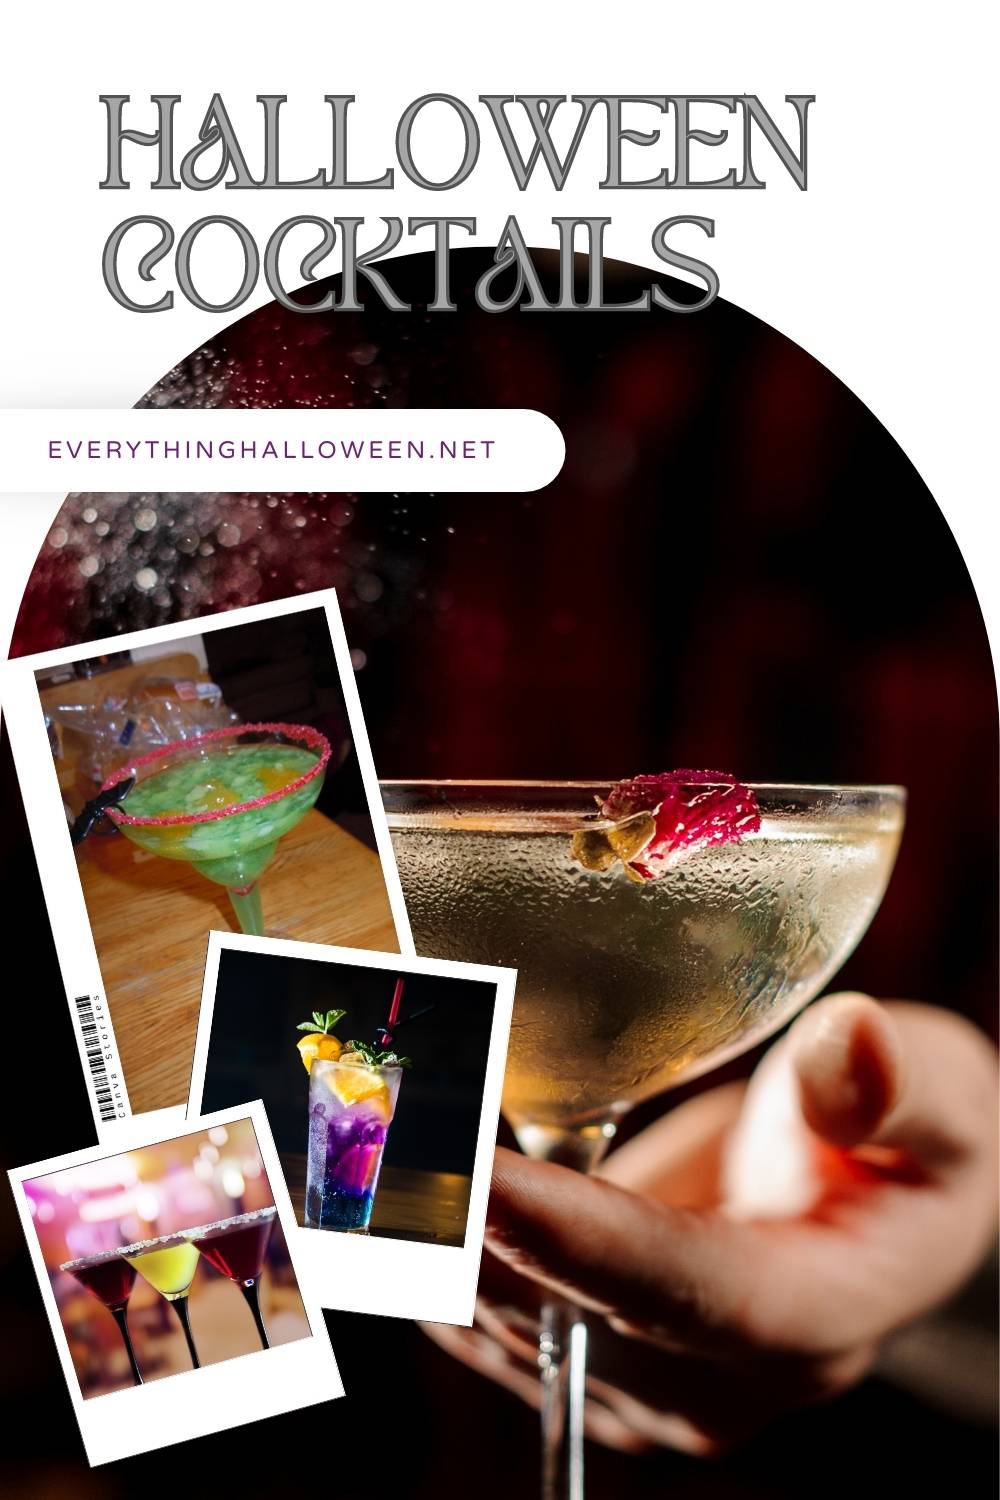 Halloween Cocktail recipes to make your party go off with a bang